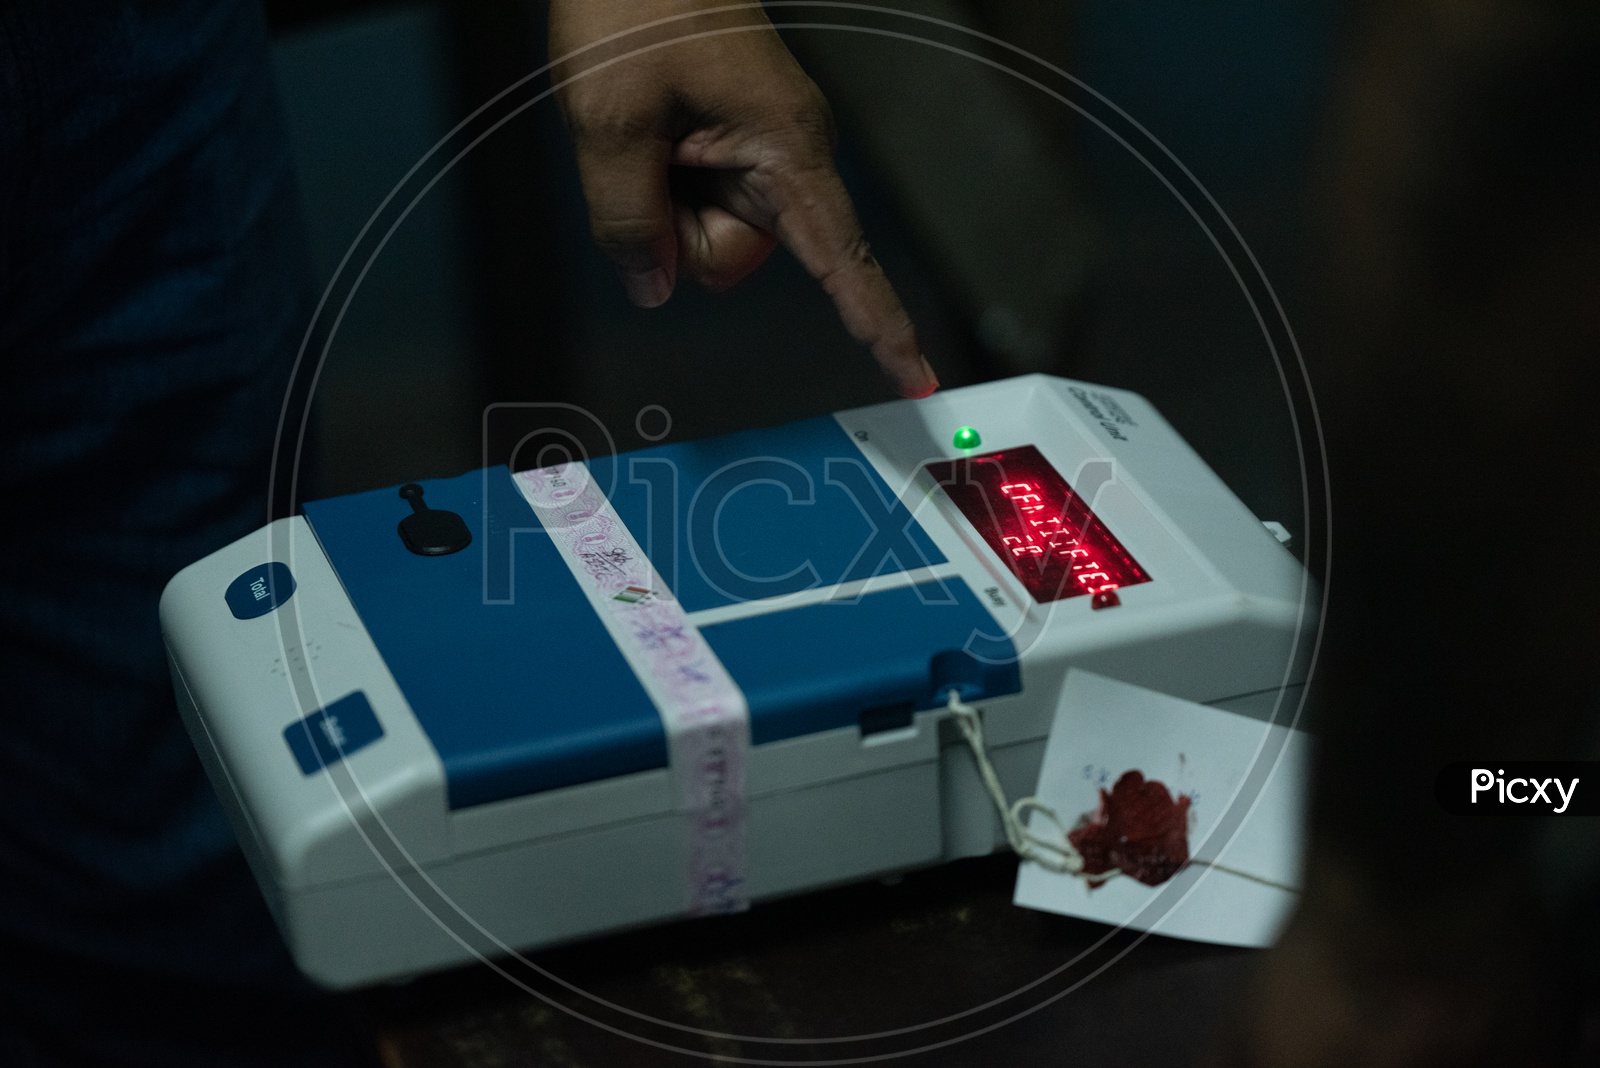 Electronic Voting Machines ( EVM ) Control Unit  With Display Of Total Polled Votes Count